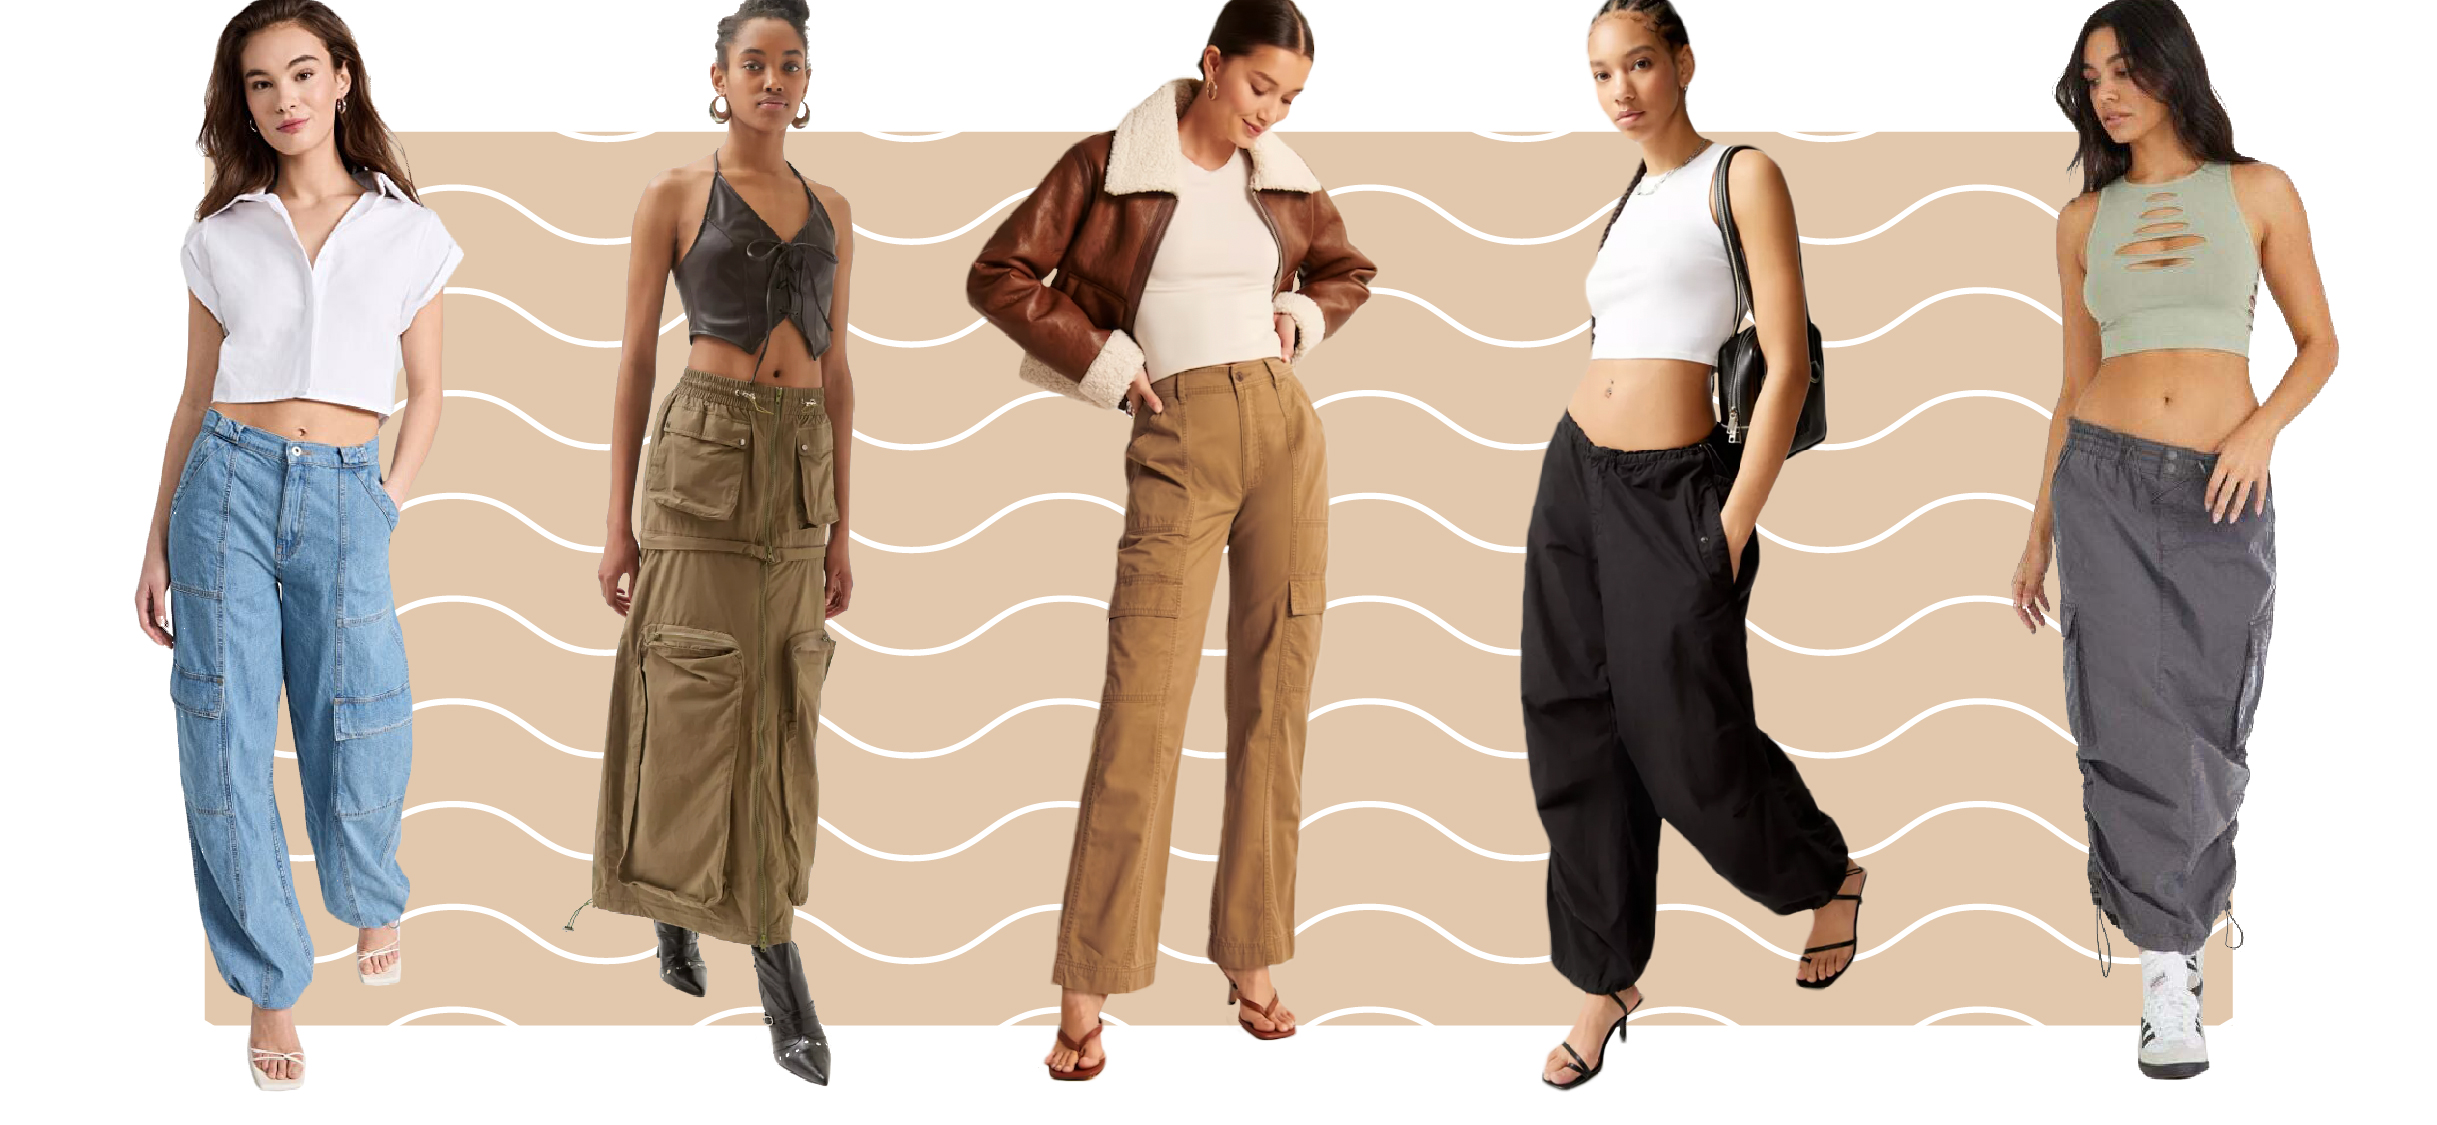 Cargo pants and skirts are trending, and these are the must-have